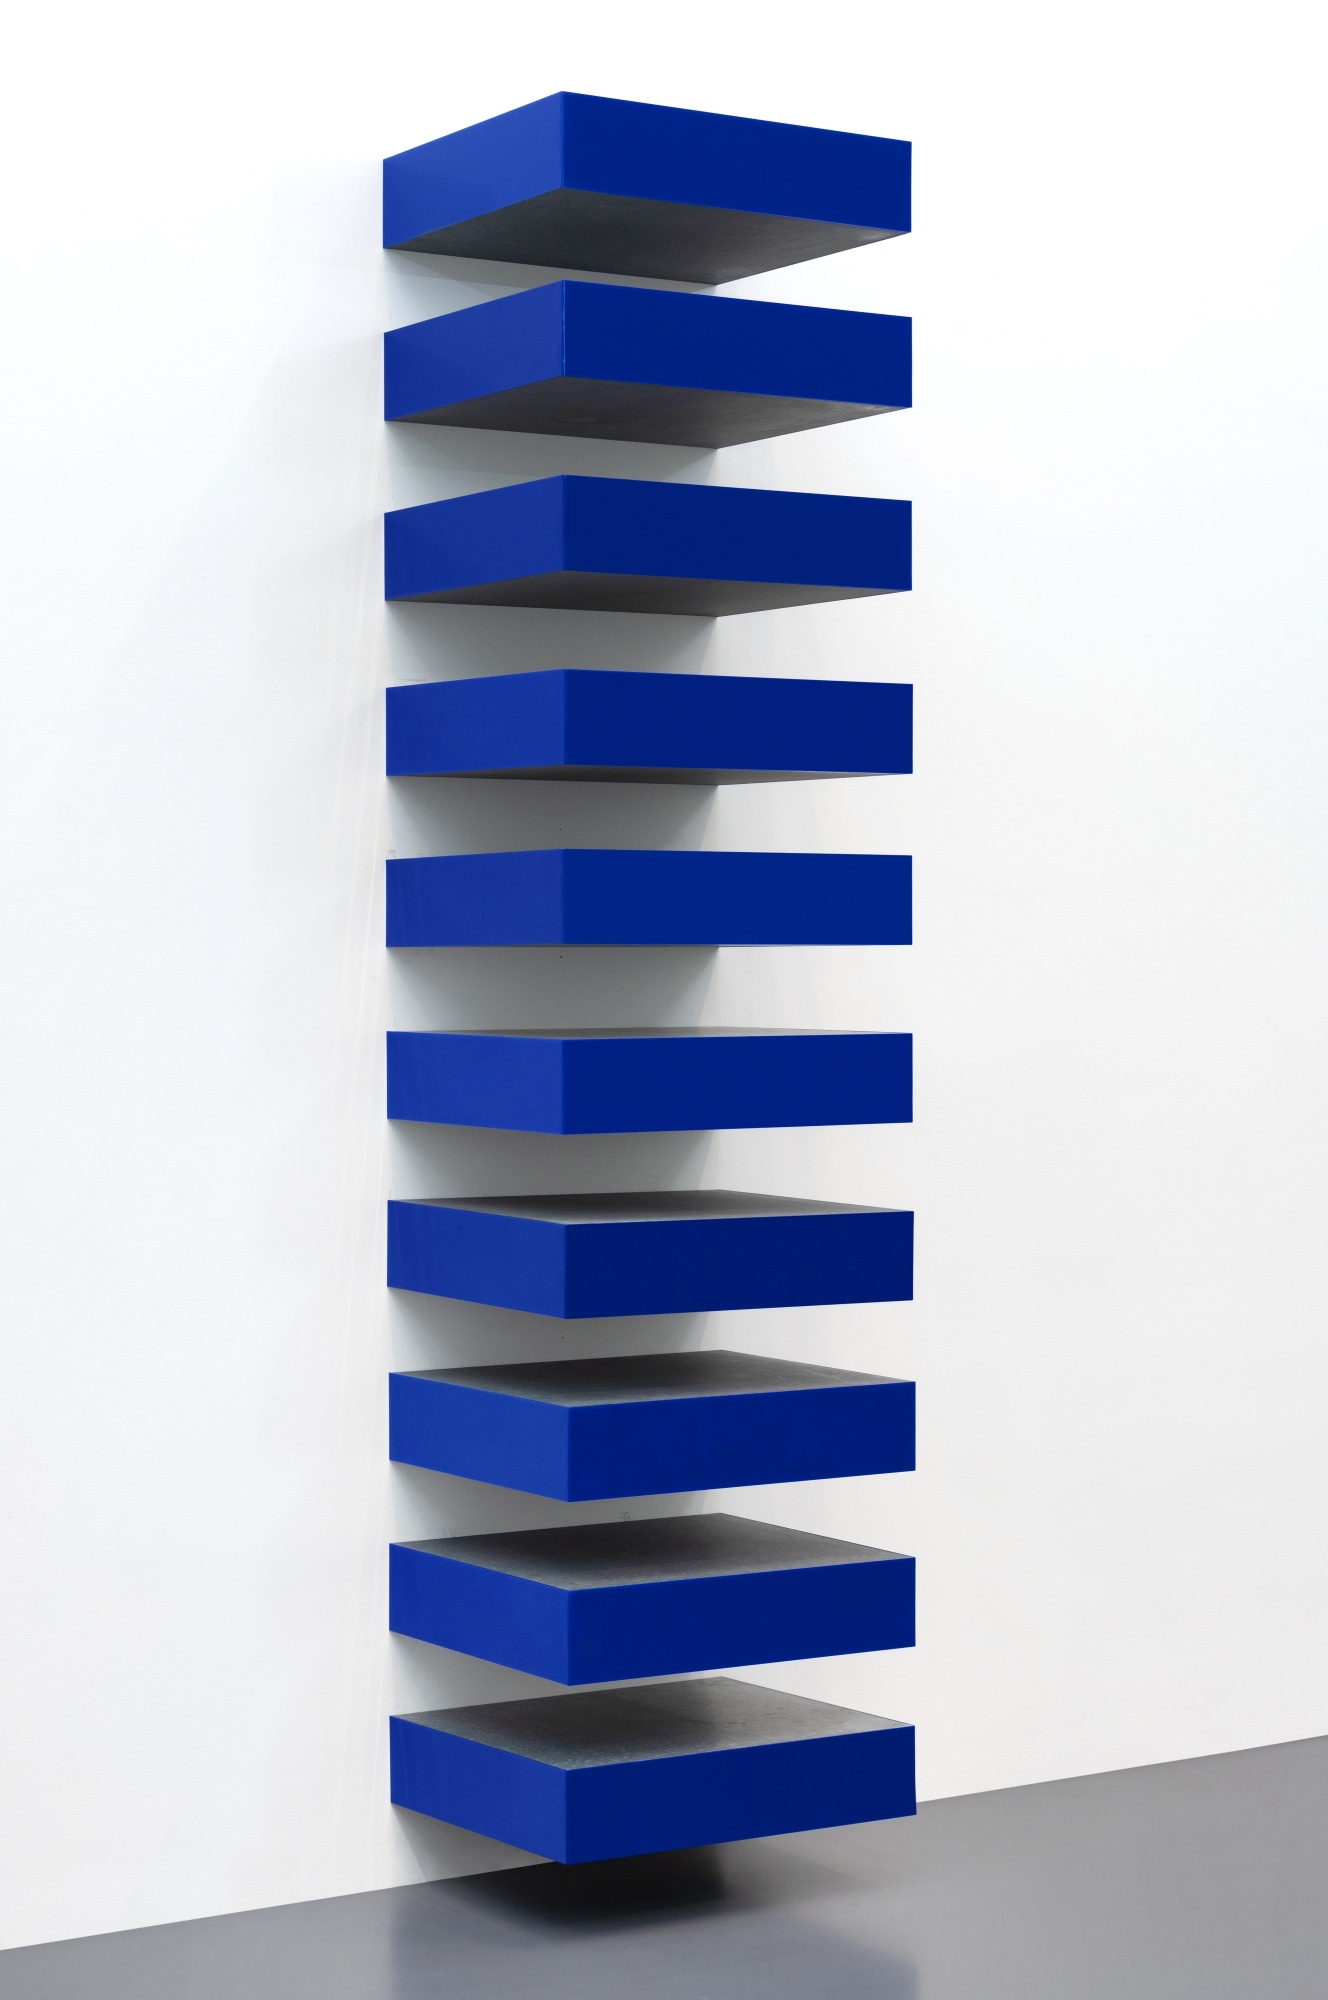 Artwork by Donald Judd, Untitled, Made of galvanized iron and opaque blue acrylic sheet, in ten parts